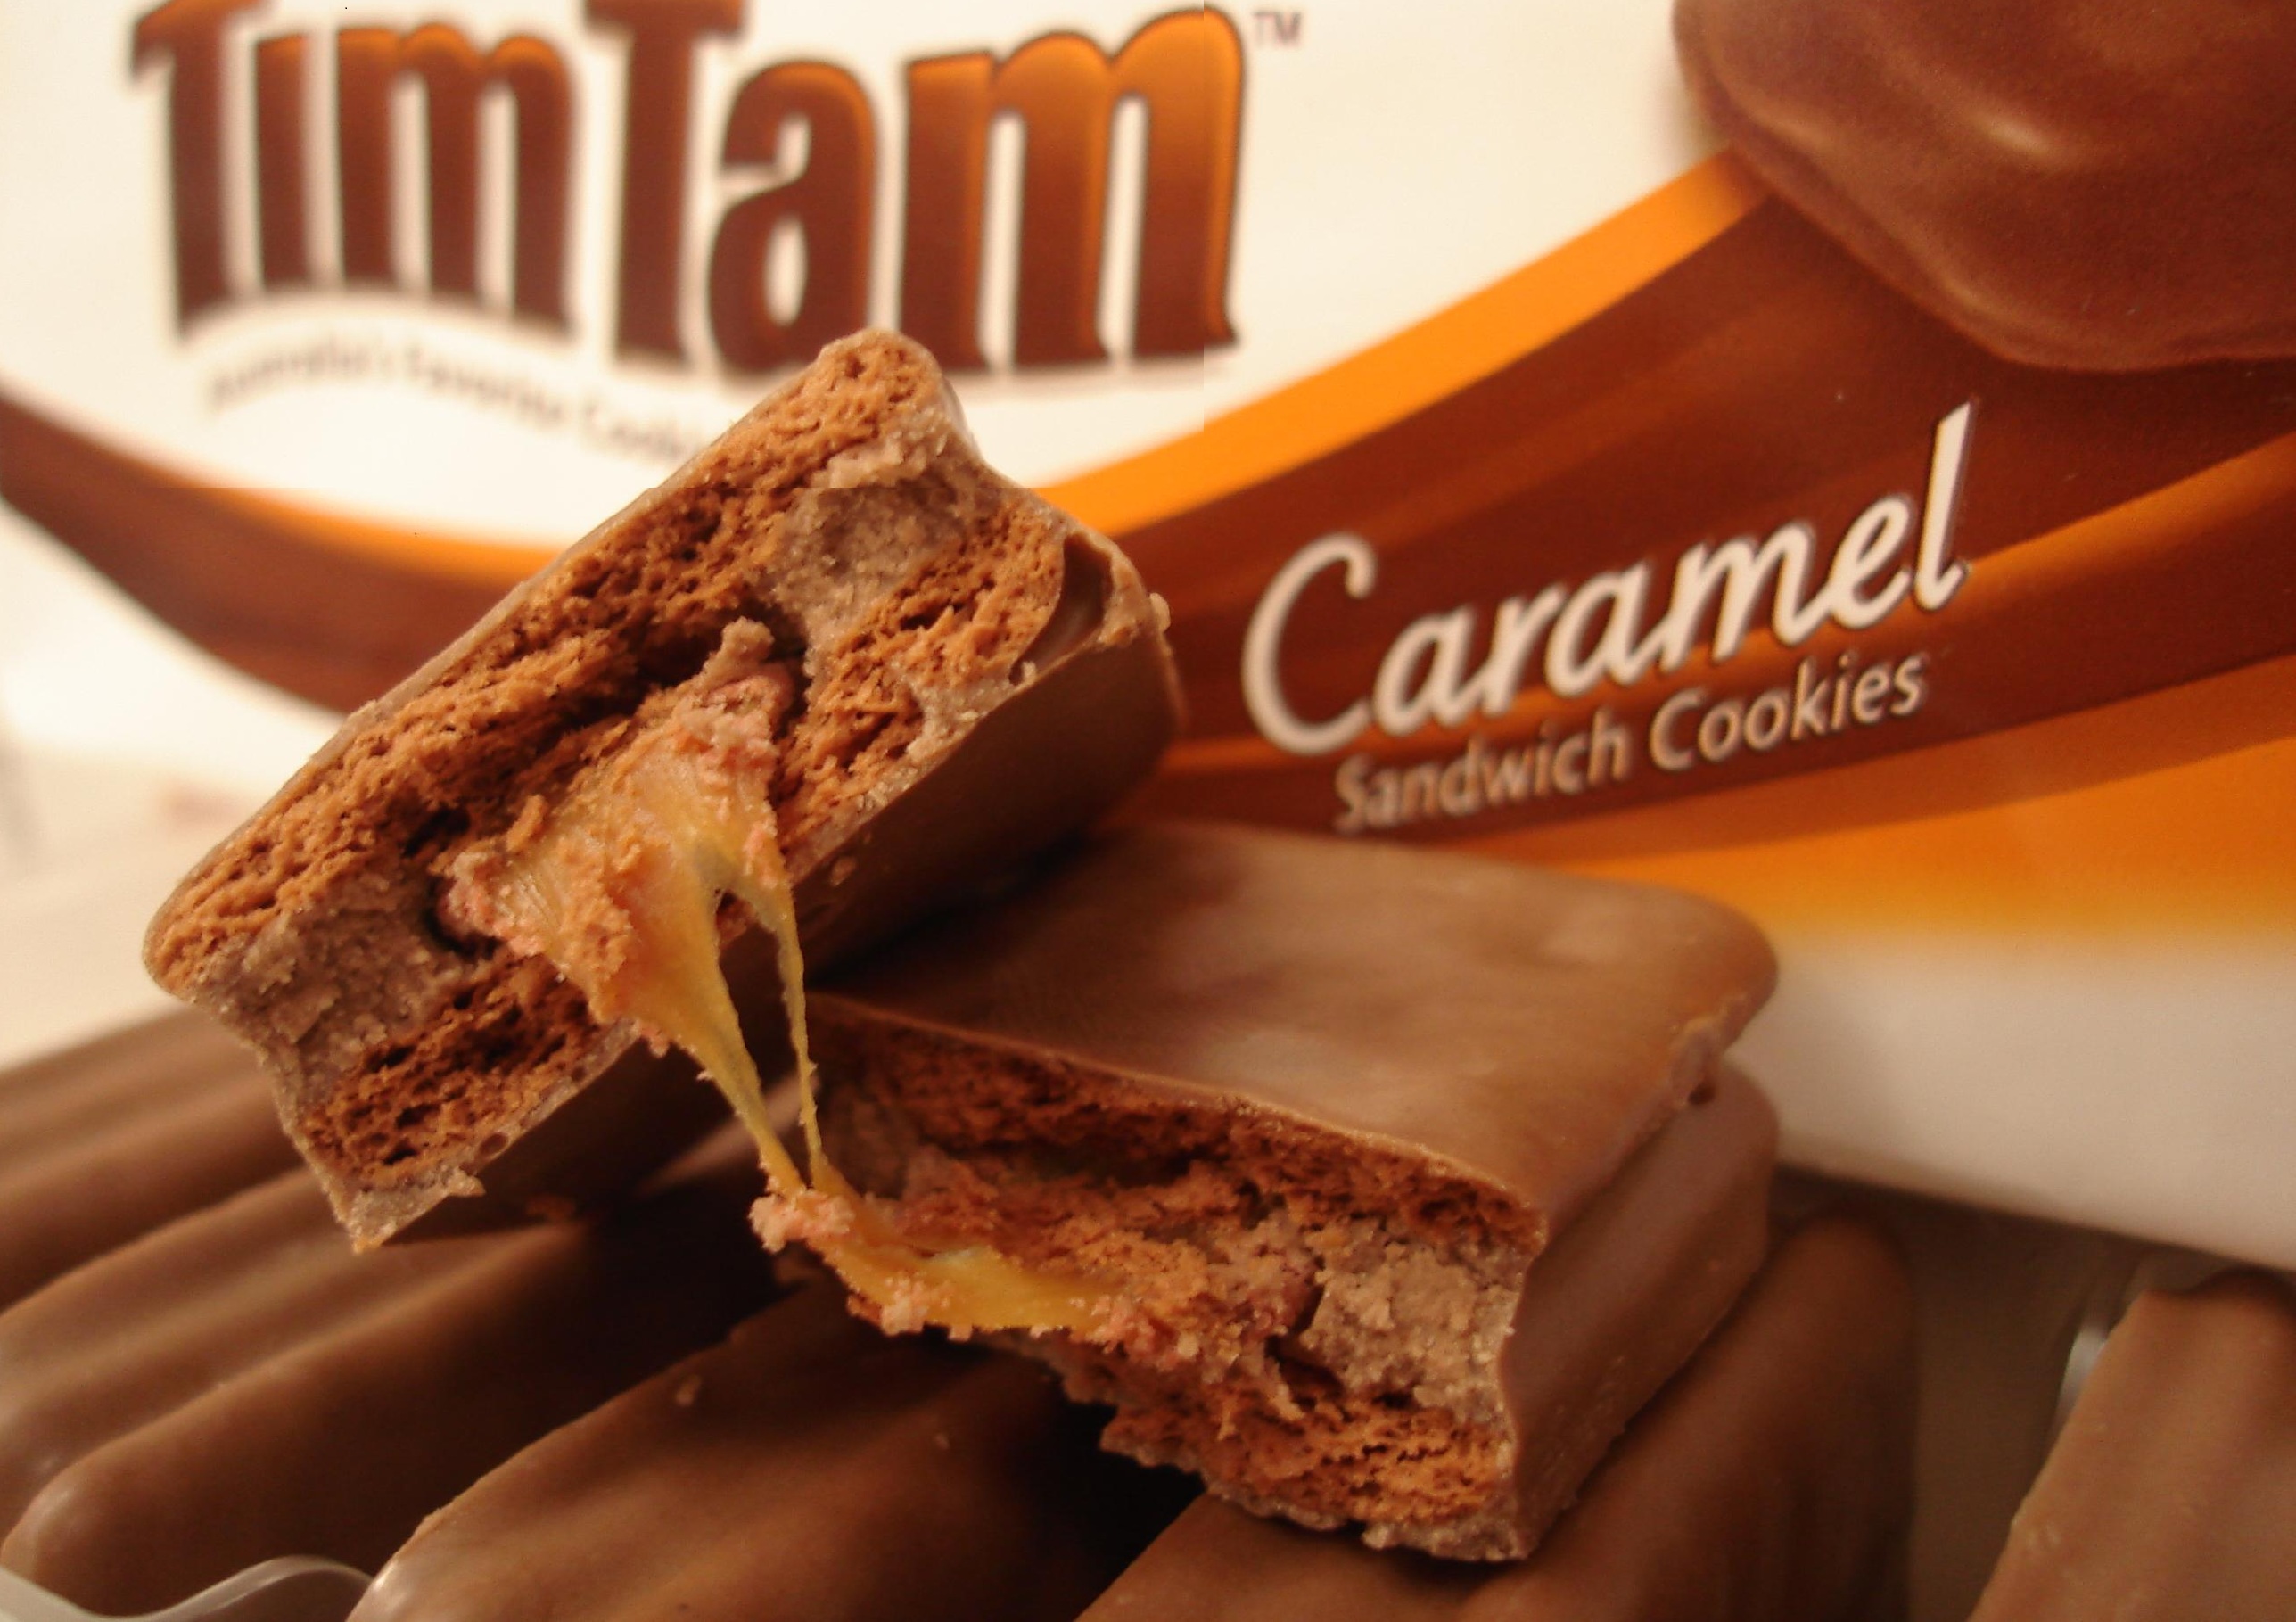 Tim Tams are chocolate covered caramel filled biscuits made in Australia